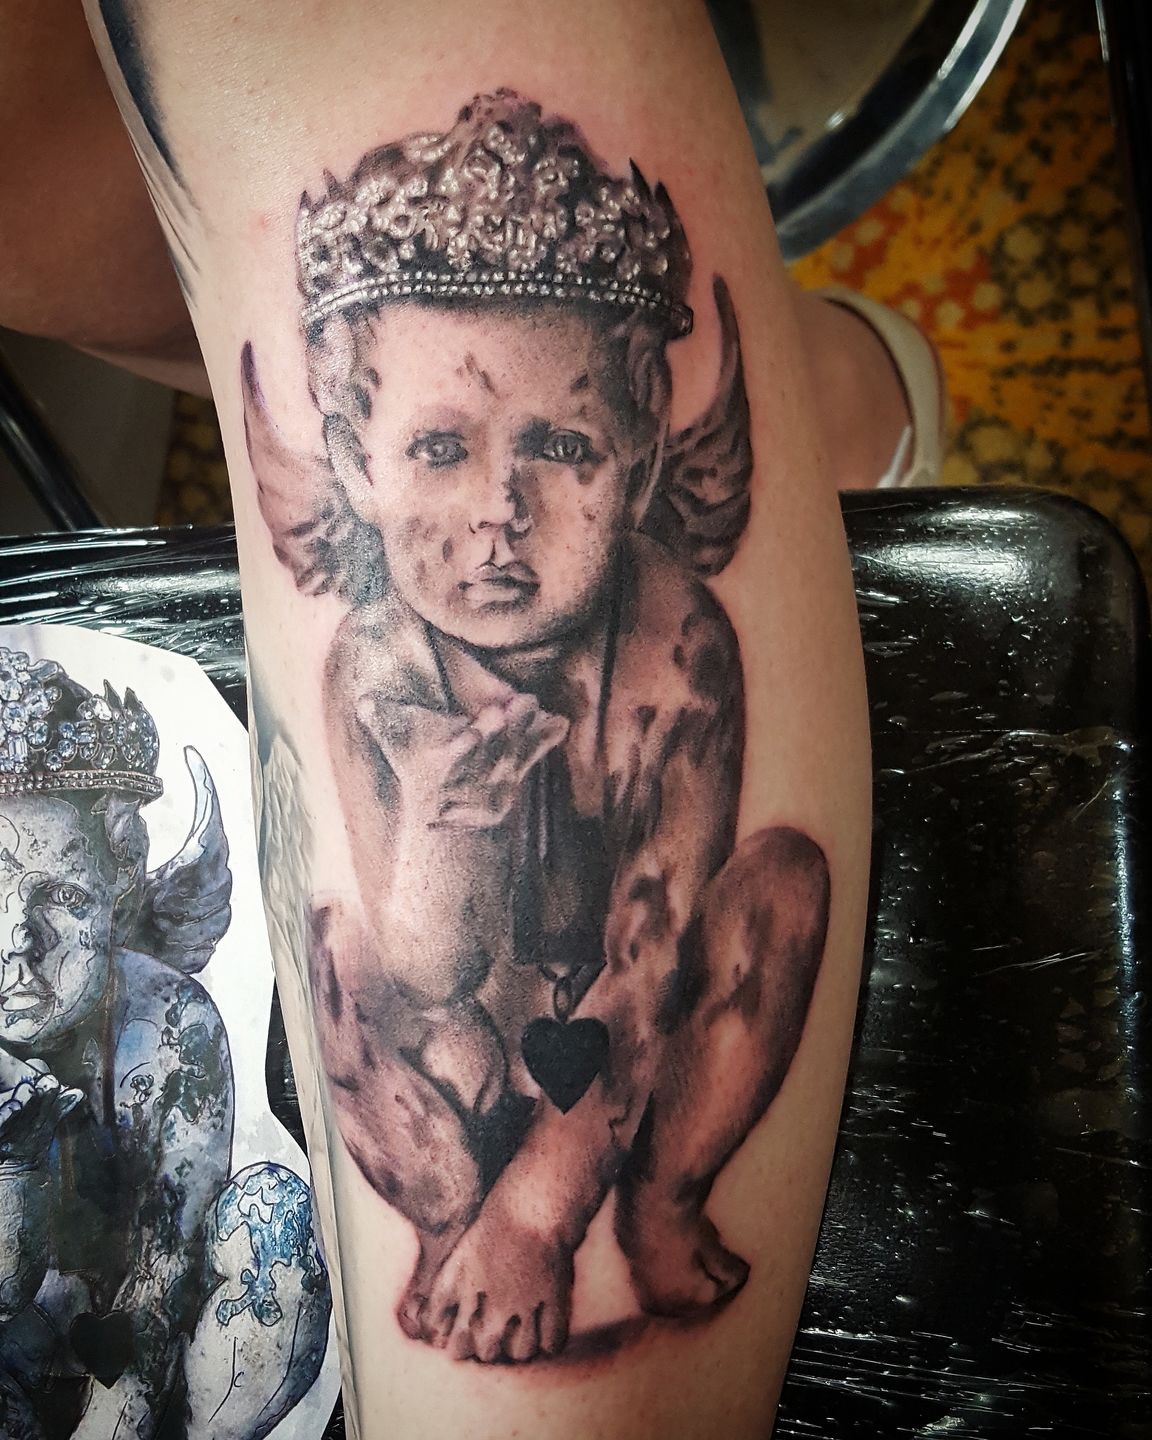 Freak Show Traditional Tattoo Theme | Traditional Pin-up Girl Tattoo